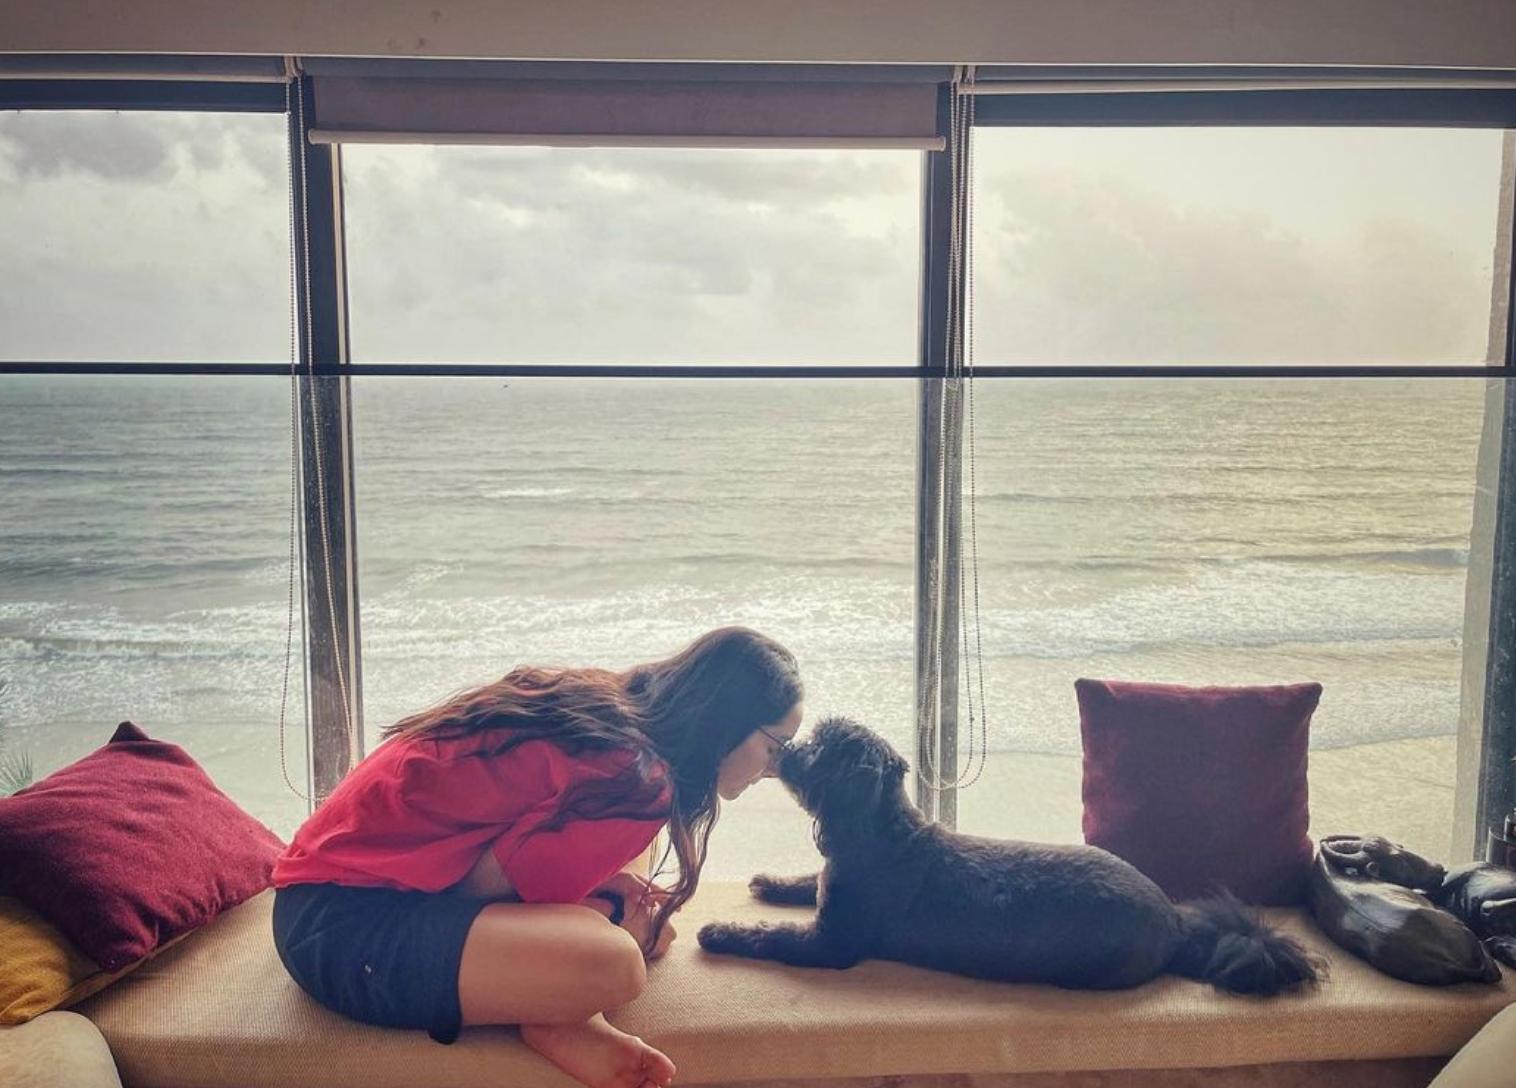 Besides sharing stunning portraits and candid snapshots of herself, Shraddha Kapoor's Instagram feed is brimming with charming images and videos featuring her beloved companion, Shyloh. Their bond is the epitome of true best friend goals. Whenever she's not occupied with work or filming, the actress frequently treats her followers to delightful pictures with her furry companion.